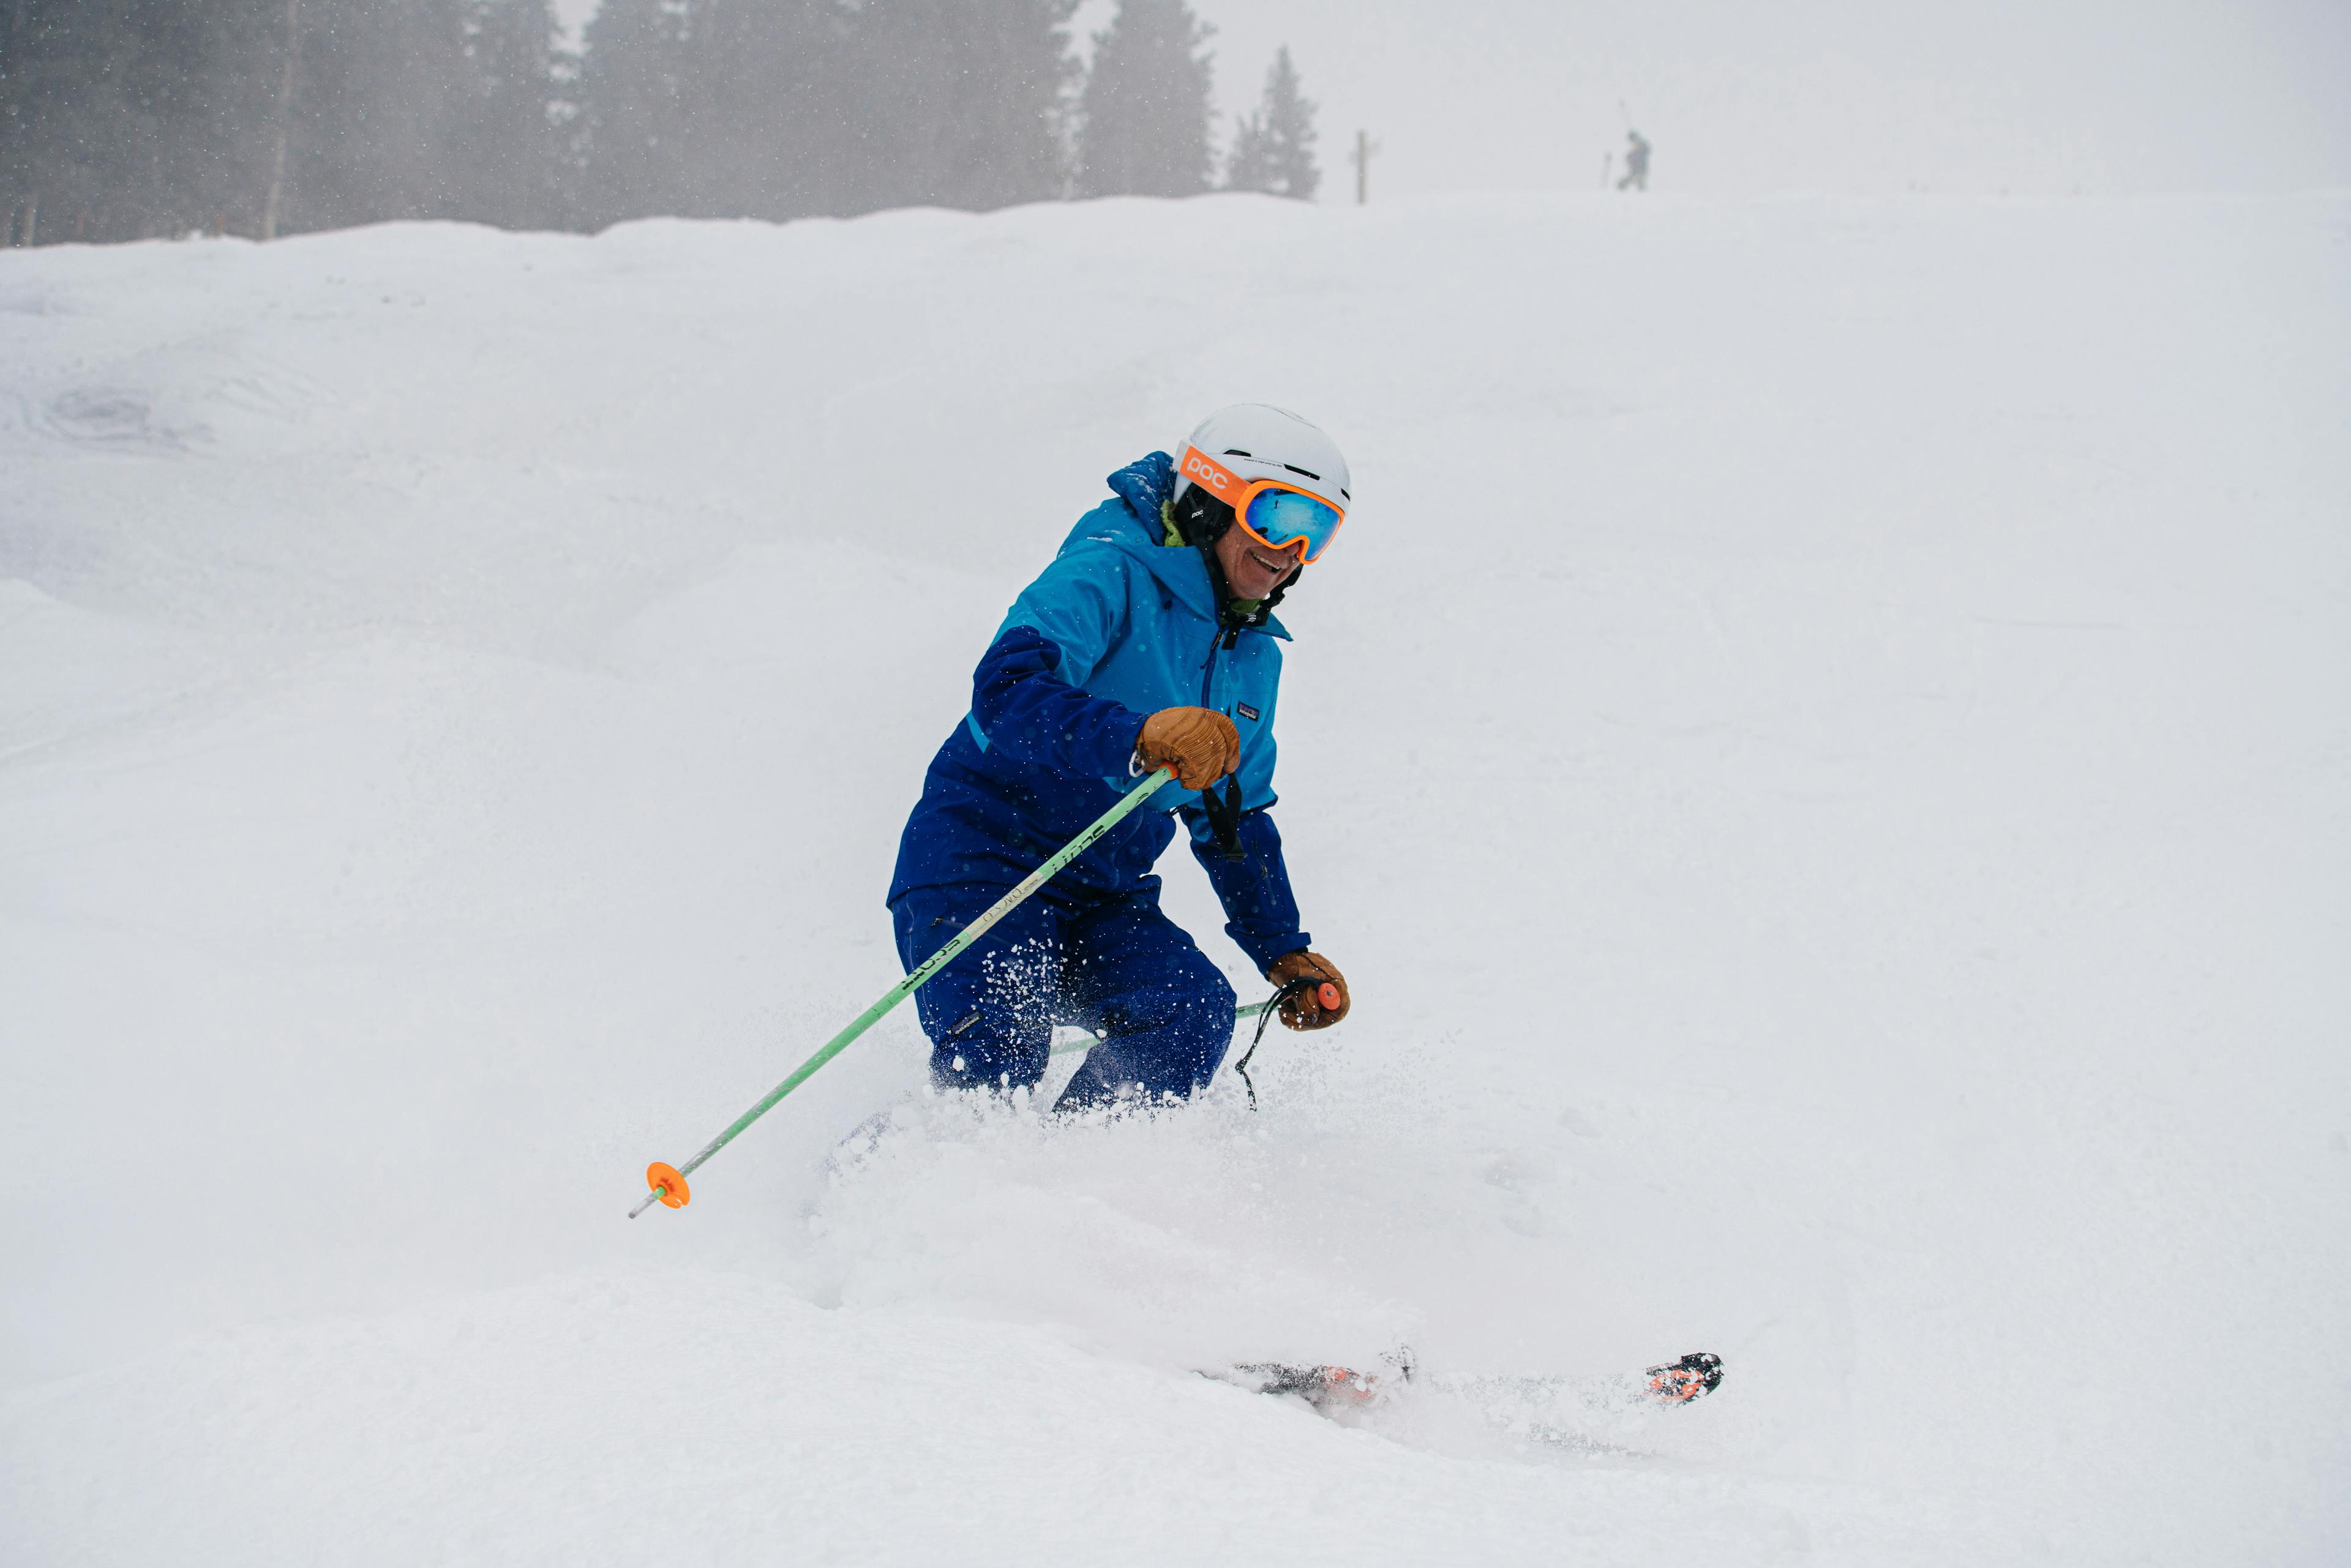 Deb Armstrong skiing on a snowy day at Taos